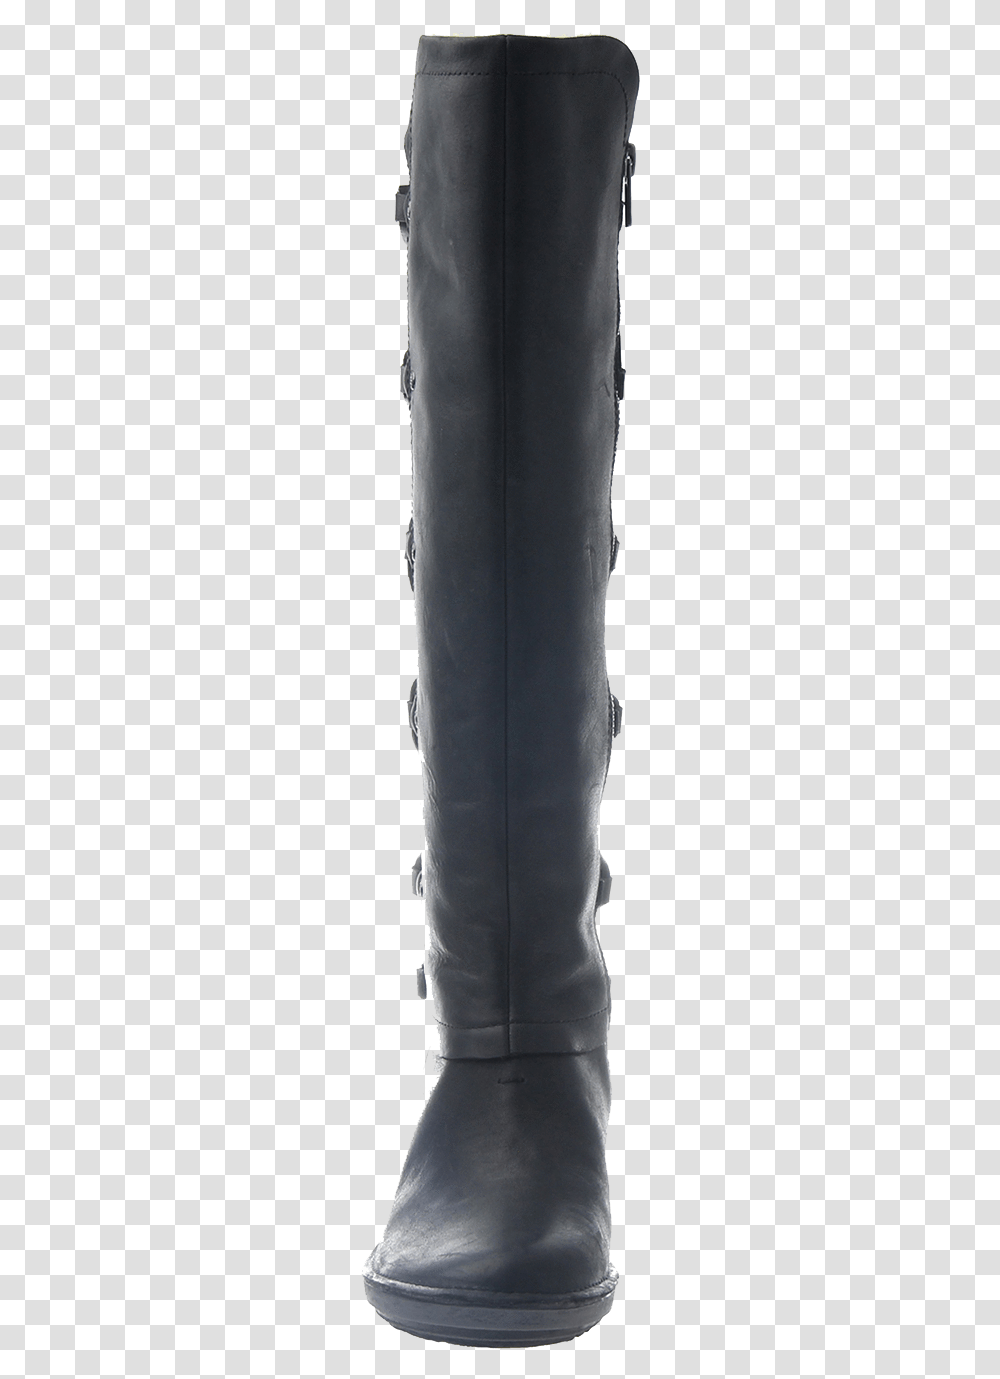 Otbt Abroad Black Tall Fleece Lined Boot With Leather Knee High Boot, Footwear, Riding Boot, Cushion Transparent Png